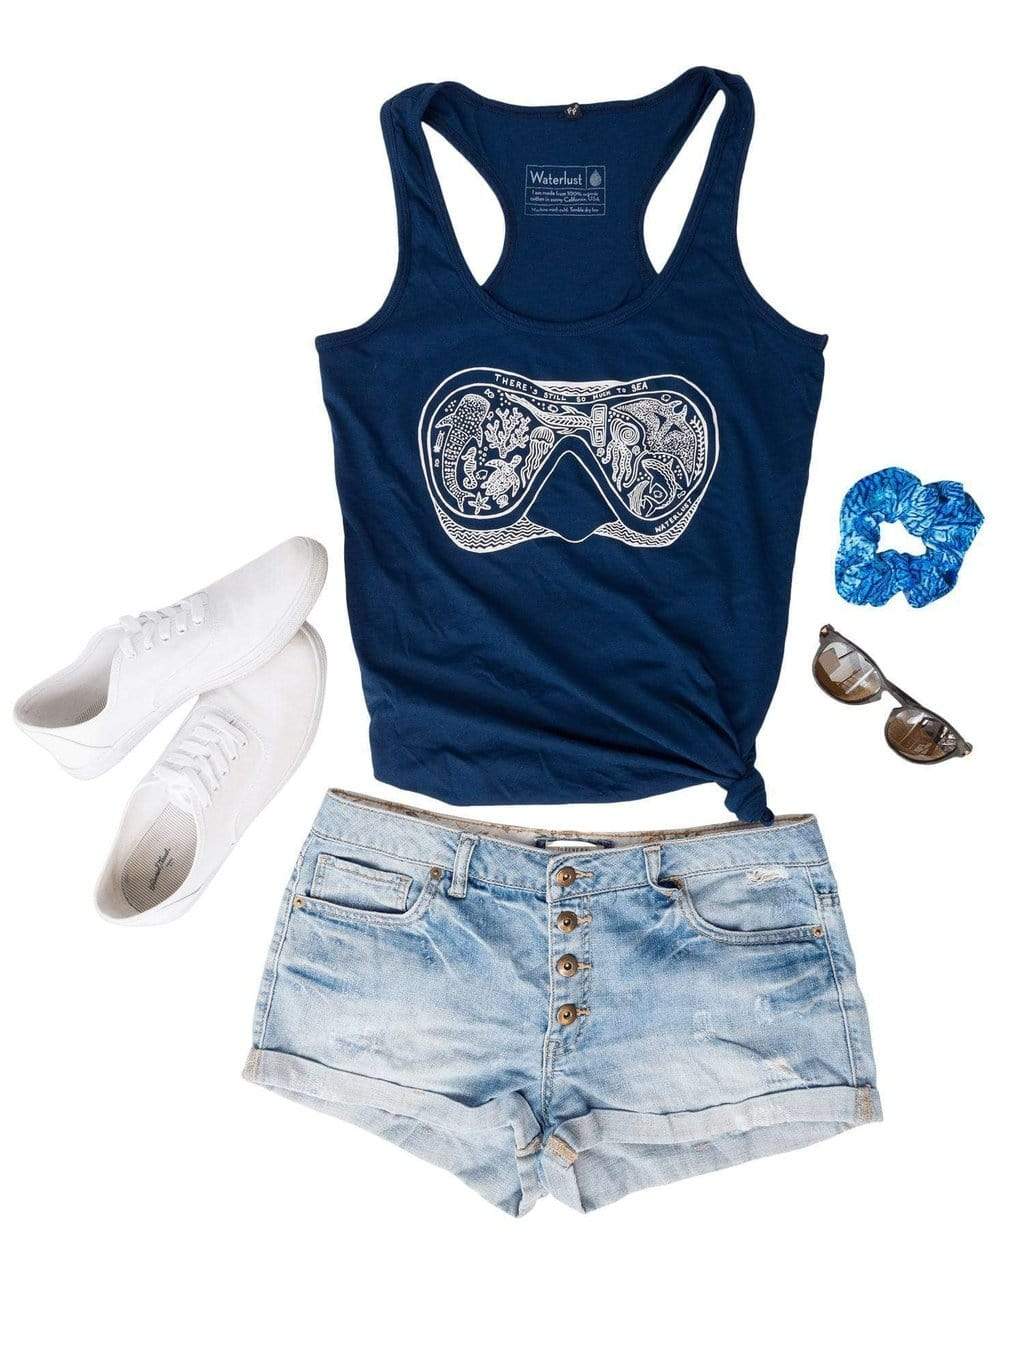 Waterlust "There's Still So Much To Sea" 100% Organic Cotton Tank Top flat off body view styled with shorts, shoes, sunglasses and a scrunchie